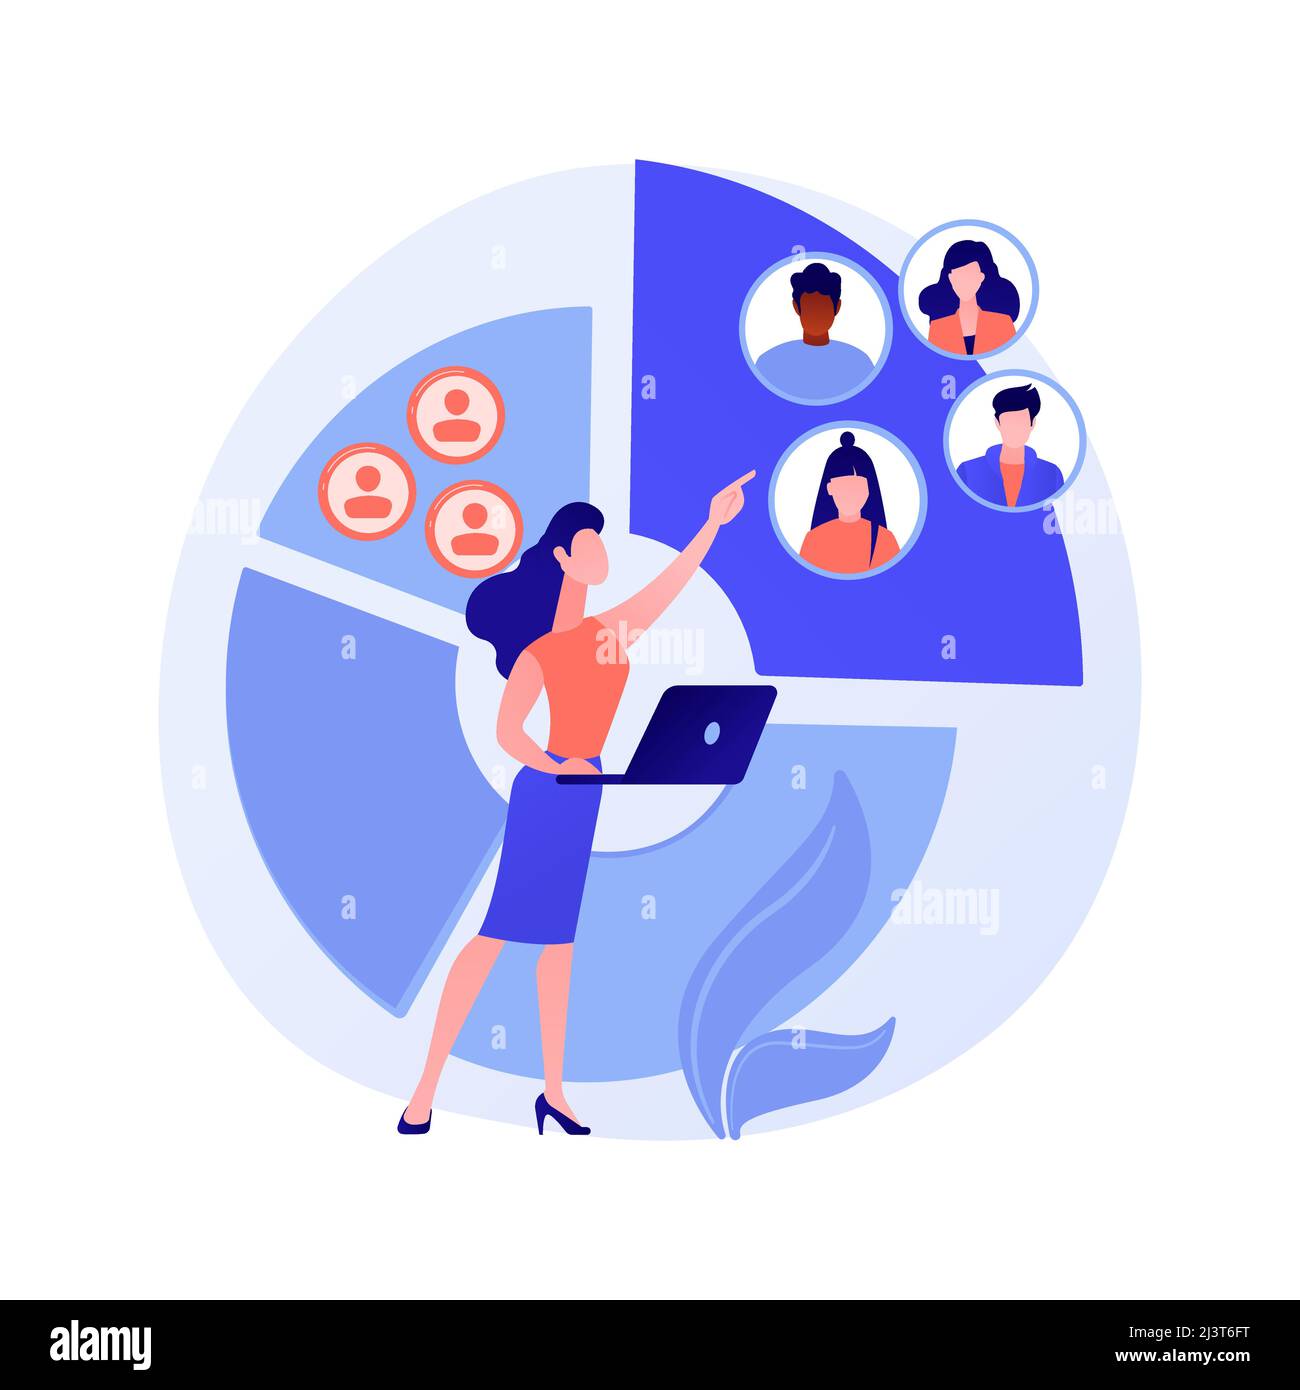 Audience segmentation abstract concept vector illustration. Customer segmentation, digital marketing tool, target audience collection, targeted messag Stock Vector